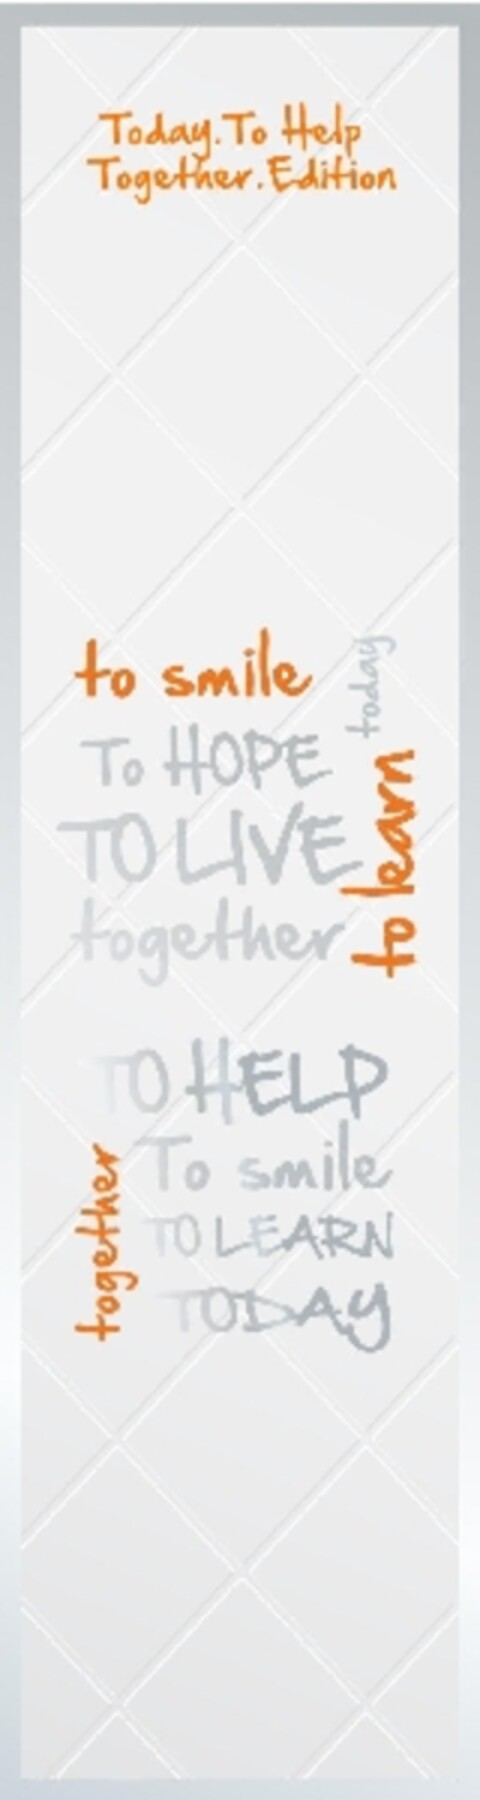 To Smile To Hope To Live To Learn Together Today To Help Edition Logo (EUIPO, 21.07.2011)